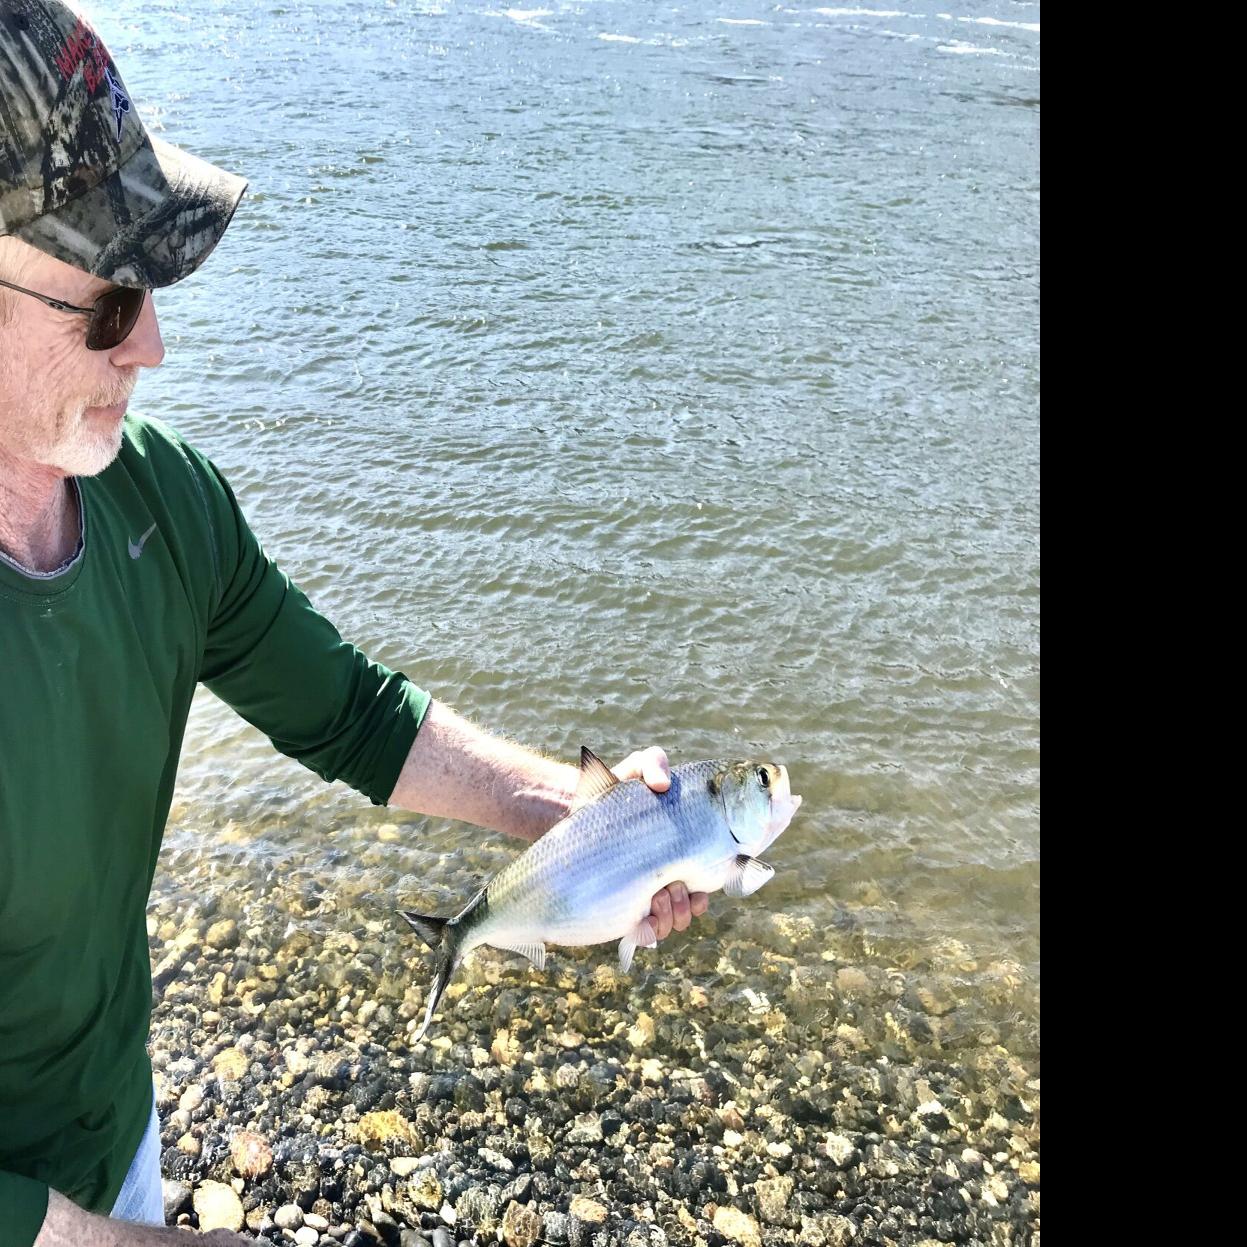 Rob Phillips: Feisty shad coming up the Columbia River in droves